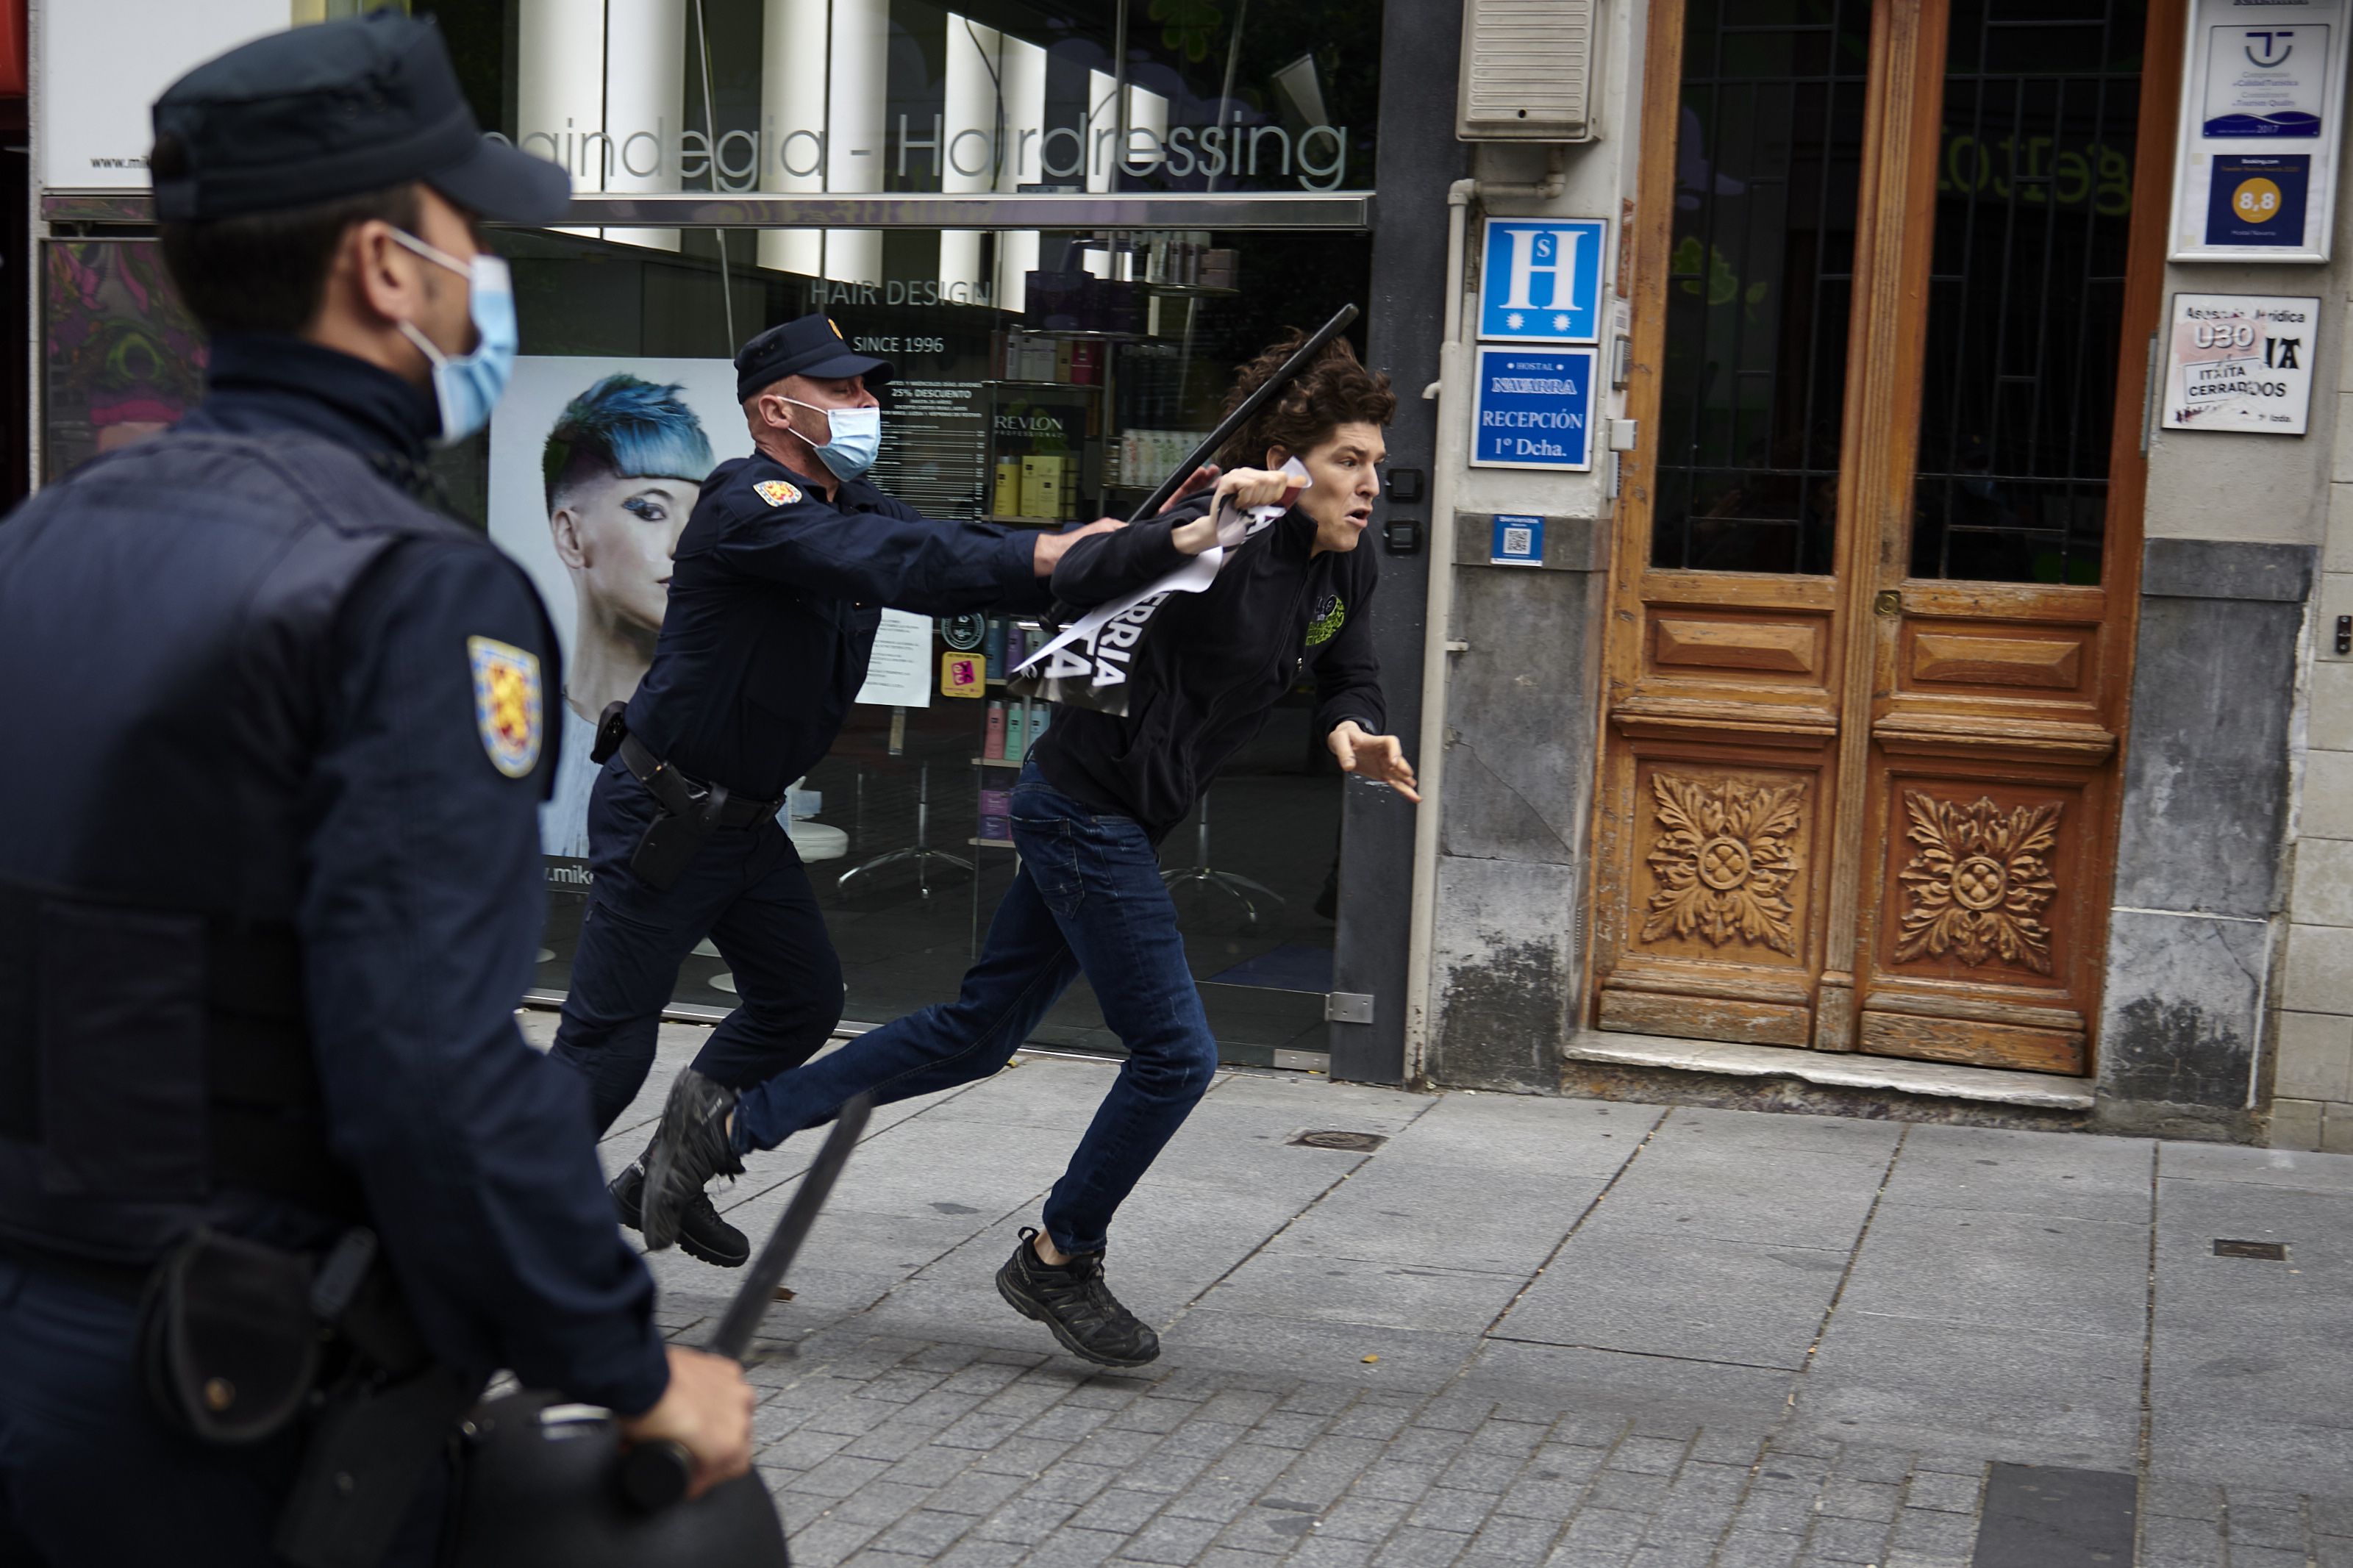 In this image, a man runs from police that are wearing face masks